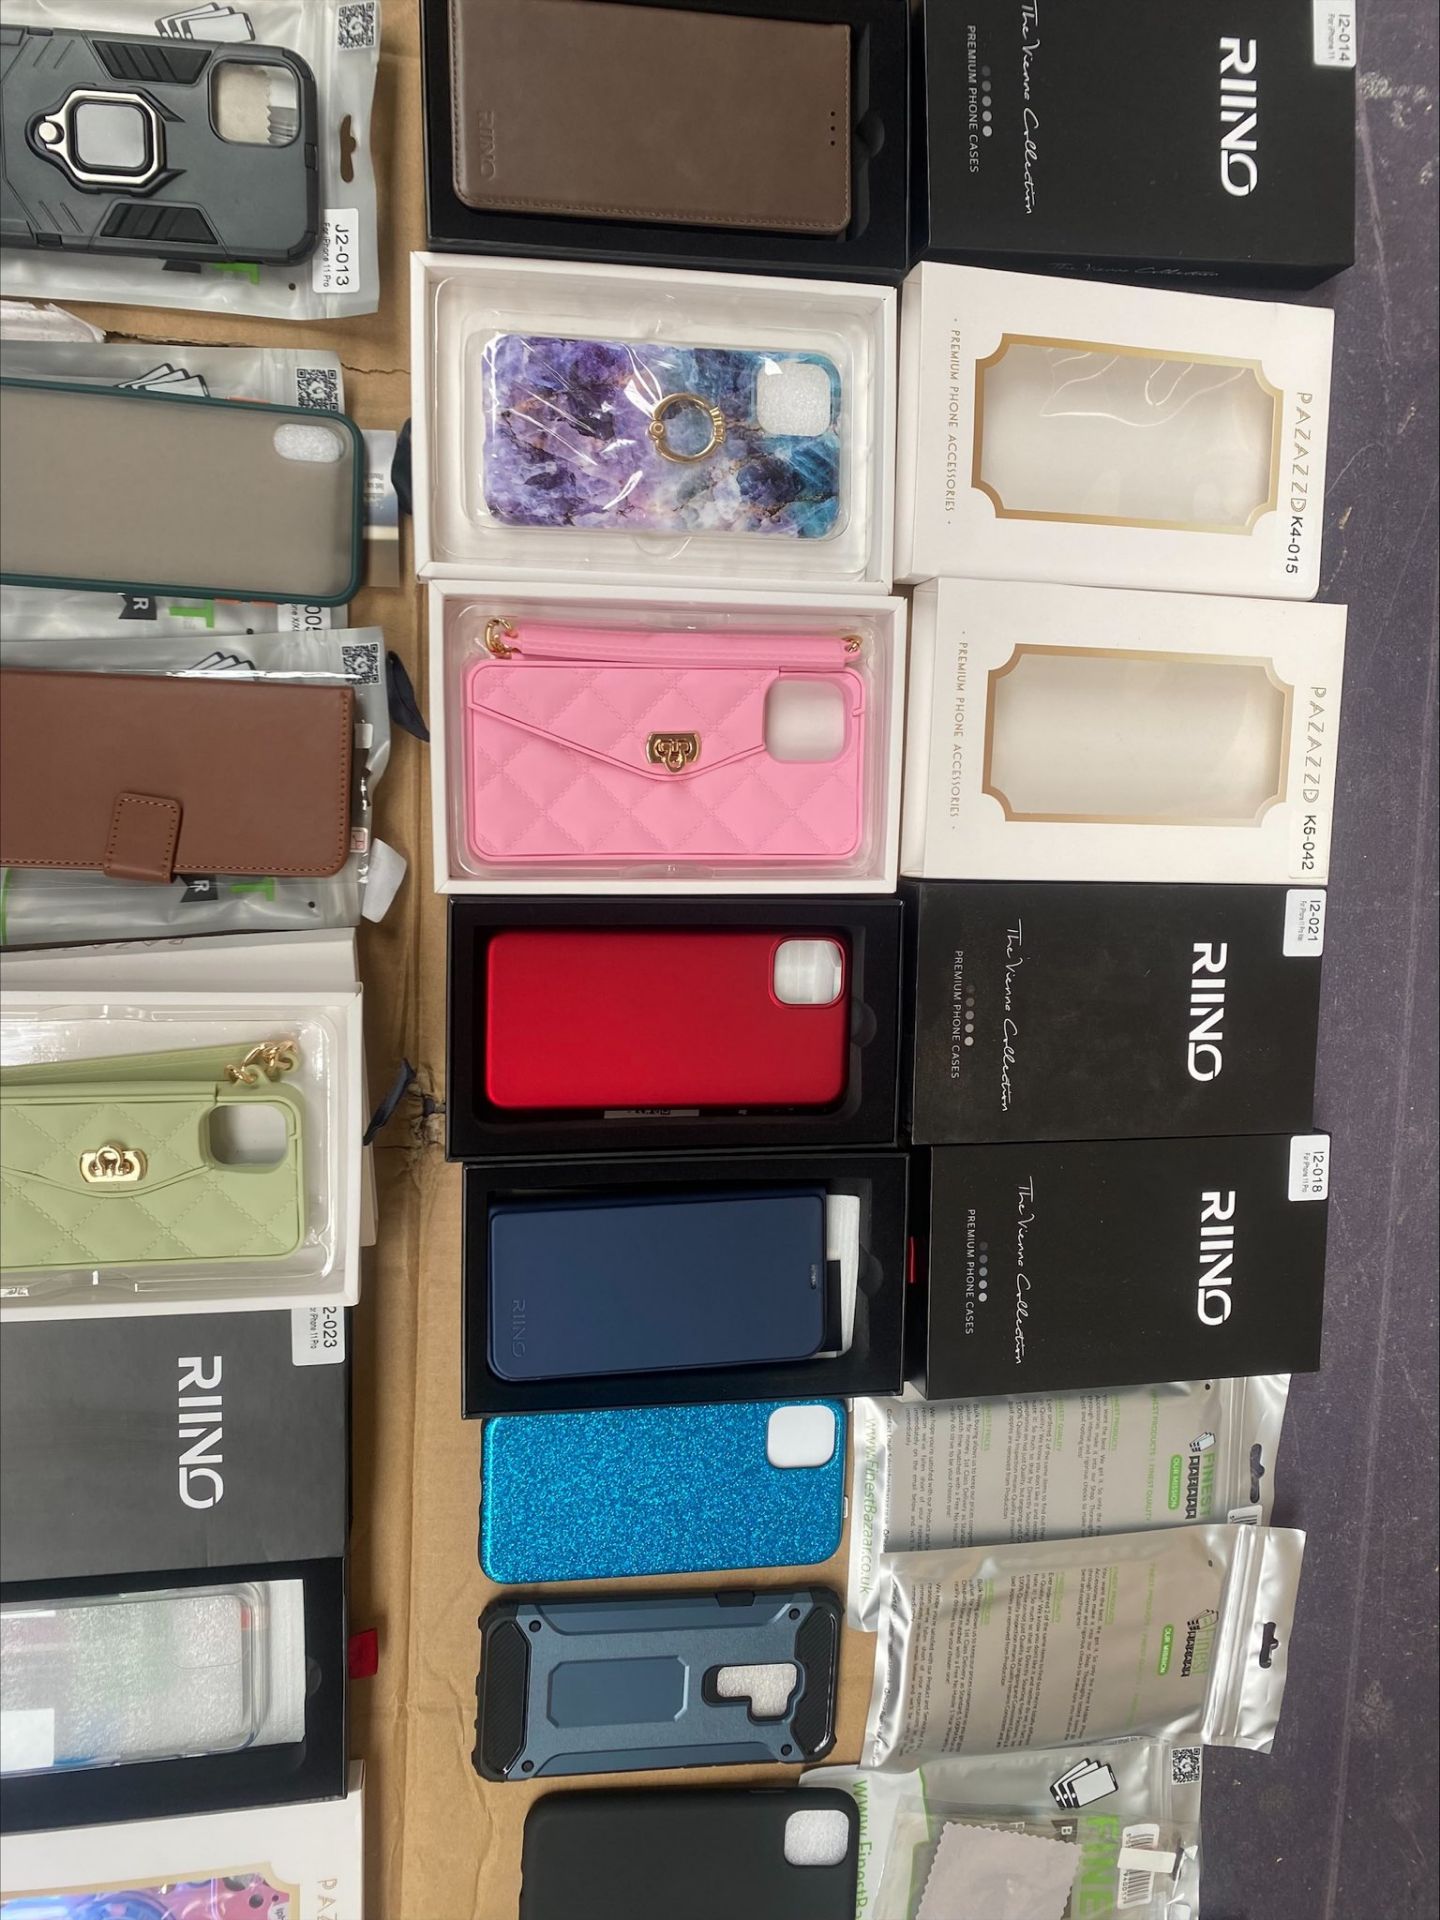 Job Lot 5K Units iPhone, Samsung, Air Pod, Apple Watch, Charging Cables, Phone Cover Accessories - Image 4 of 20